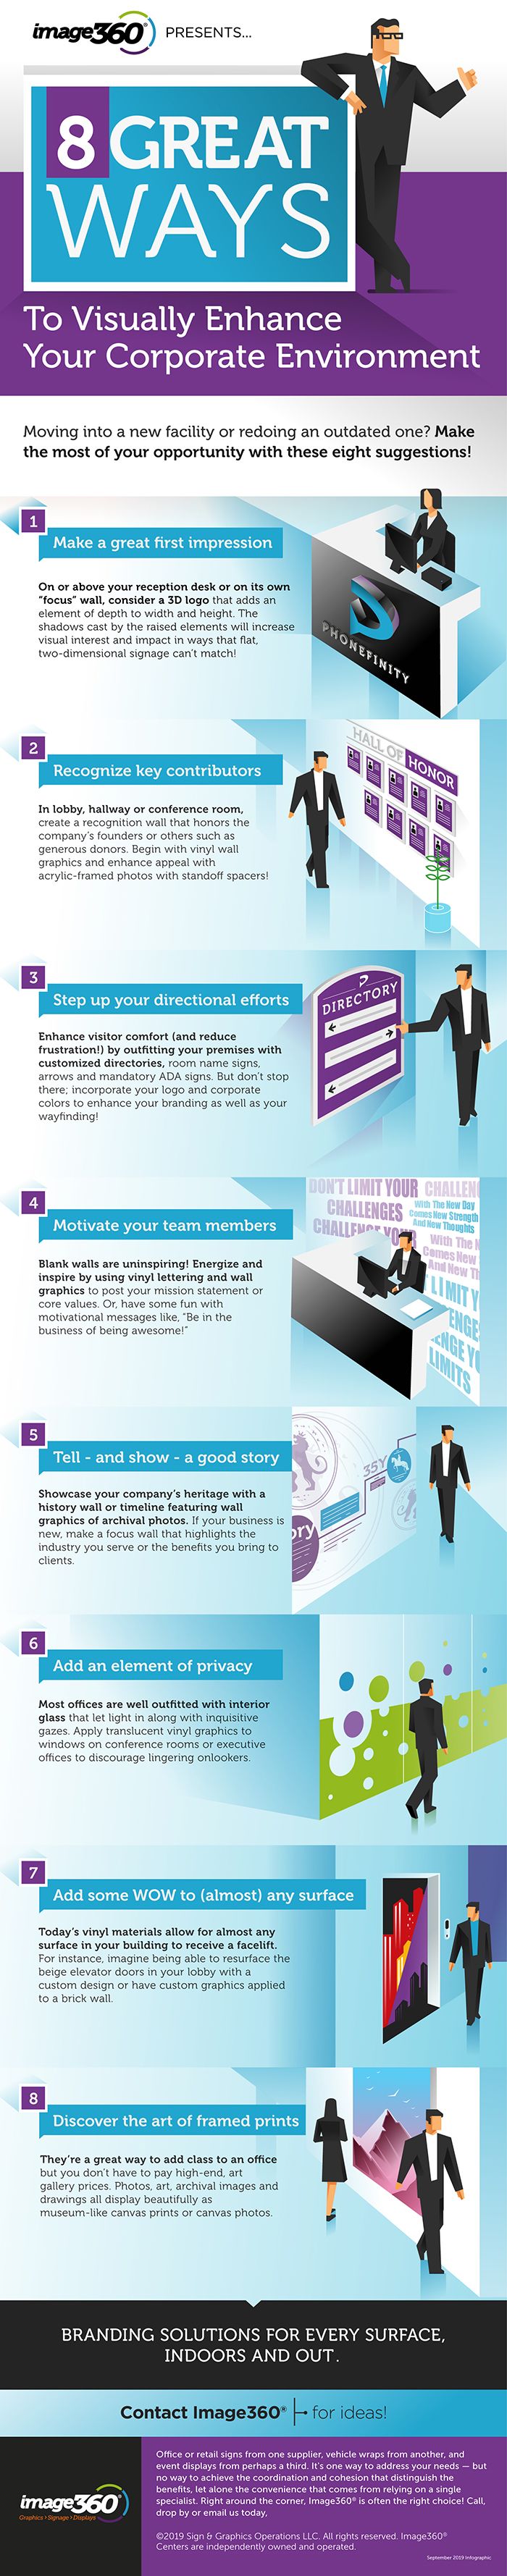 Image360 Infographic on 8 Great Ways to Visually Enhance Your Corporate Environment